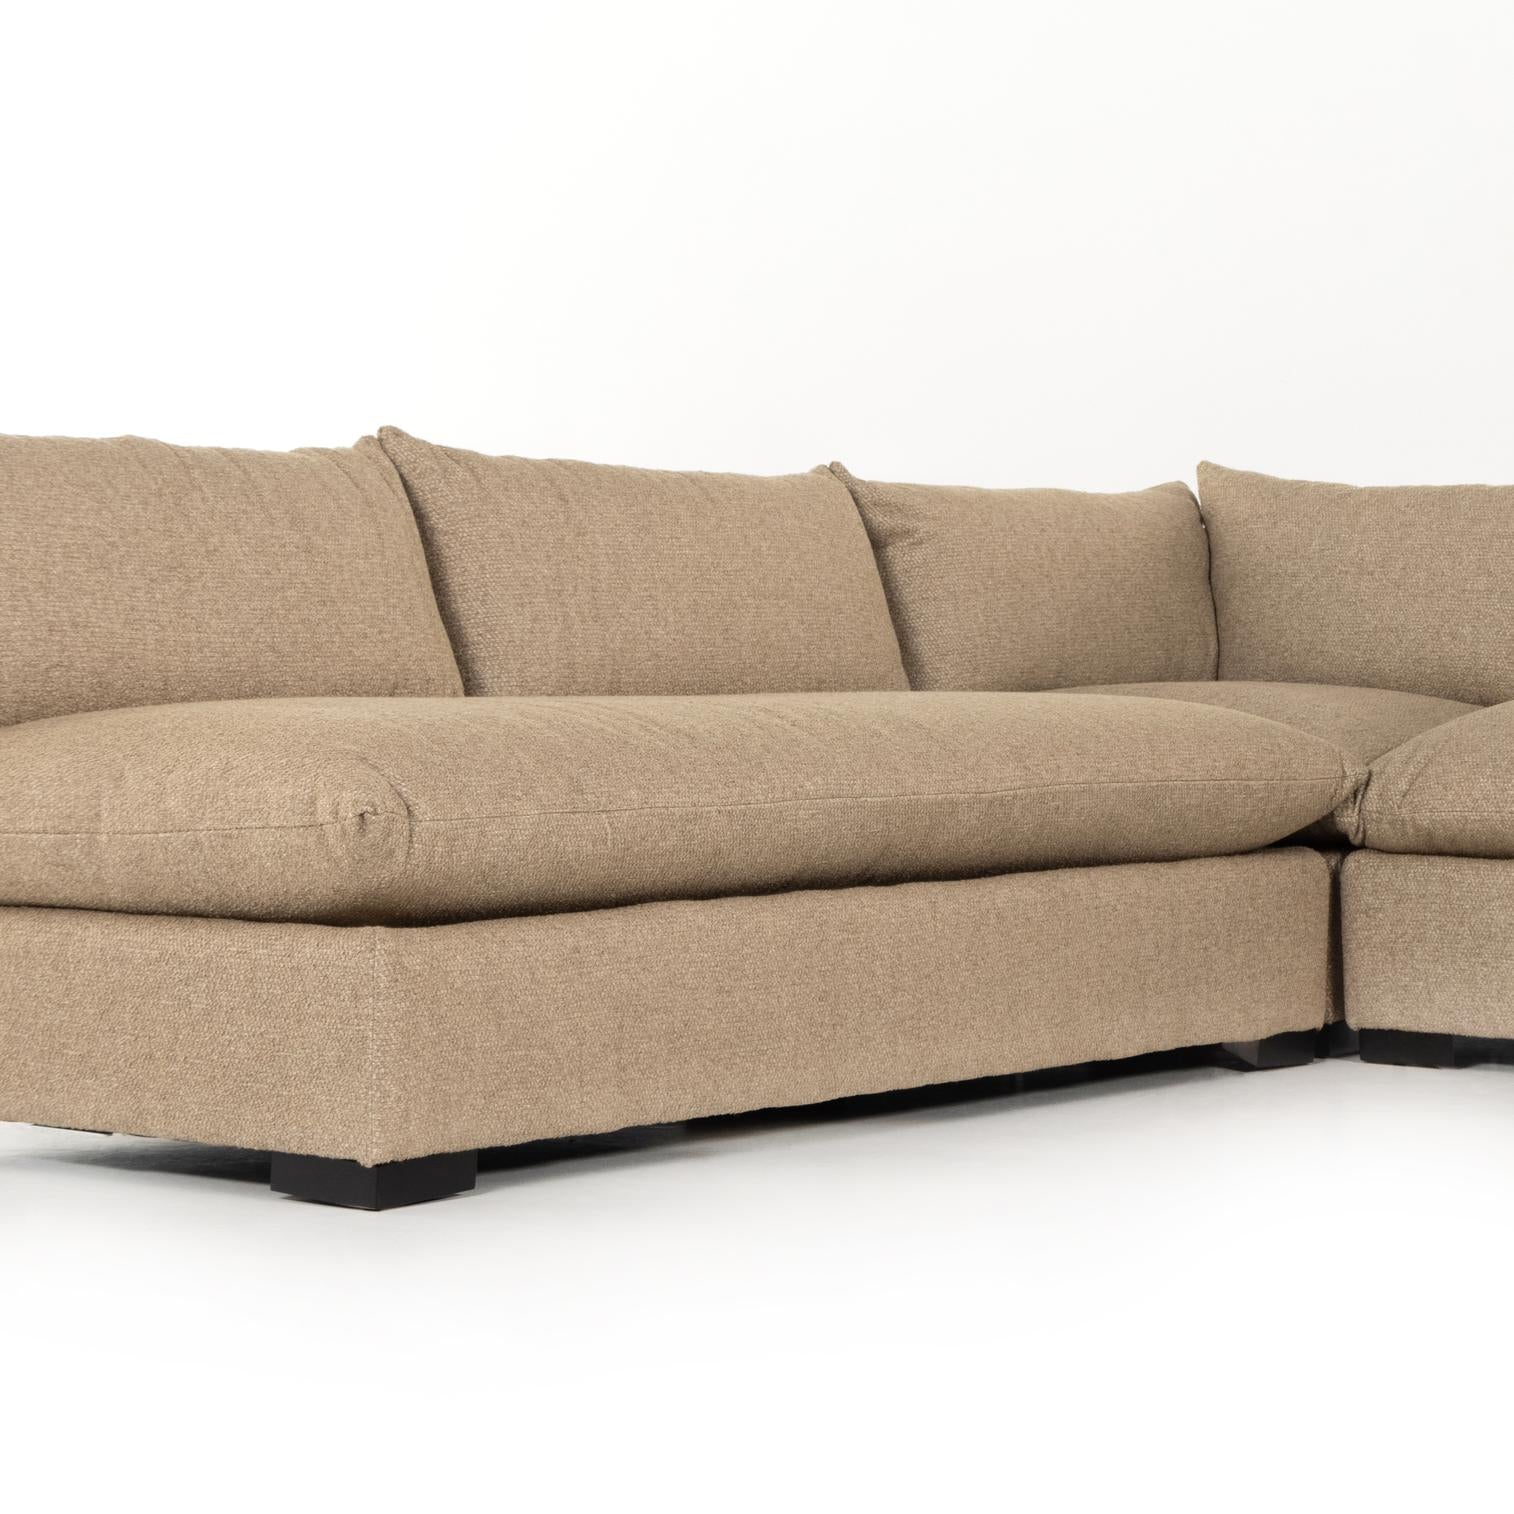 Grant 5-Piece Sectional